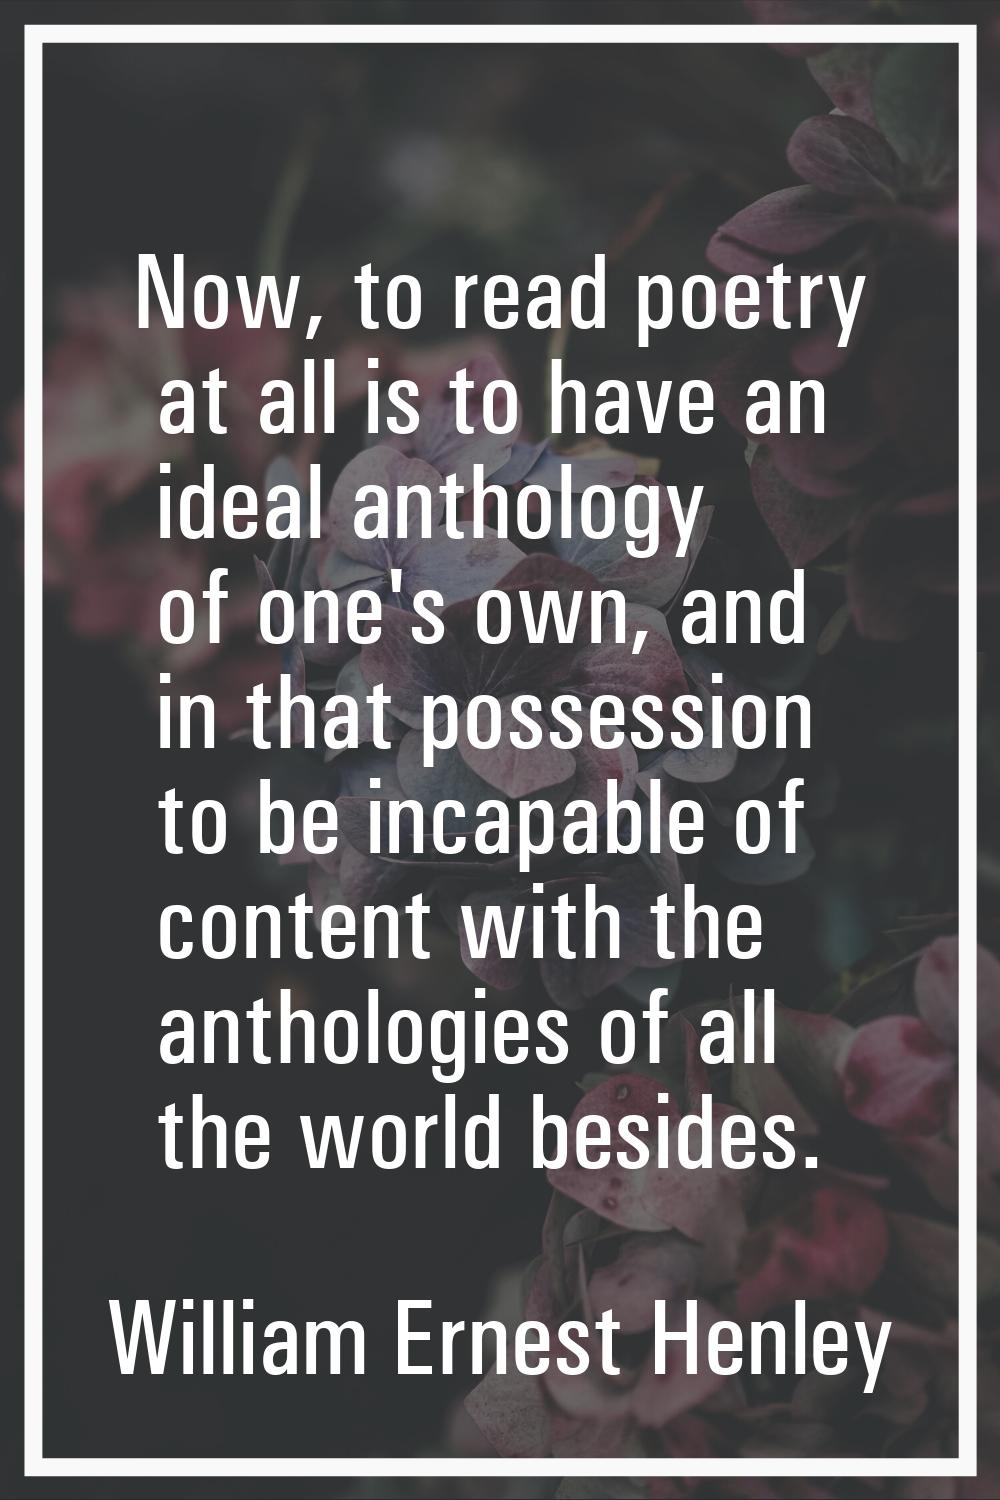 Now, to read poetry at all is to have an ideal anthology of one's own, and in that possession to be